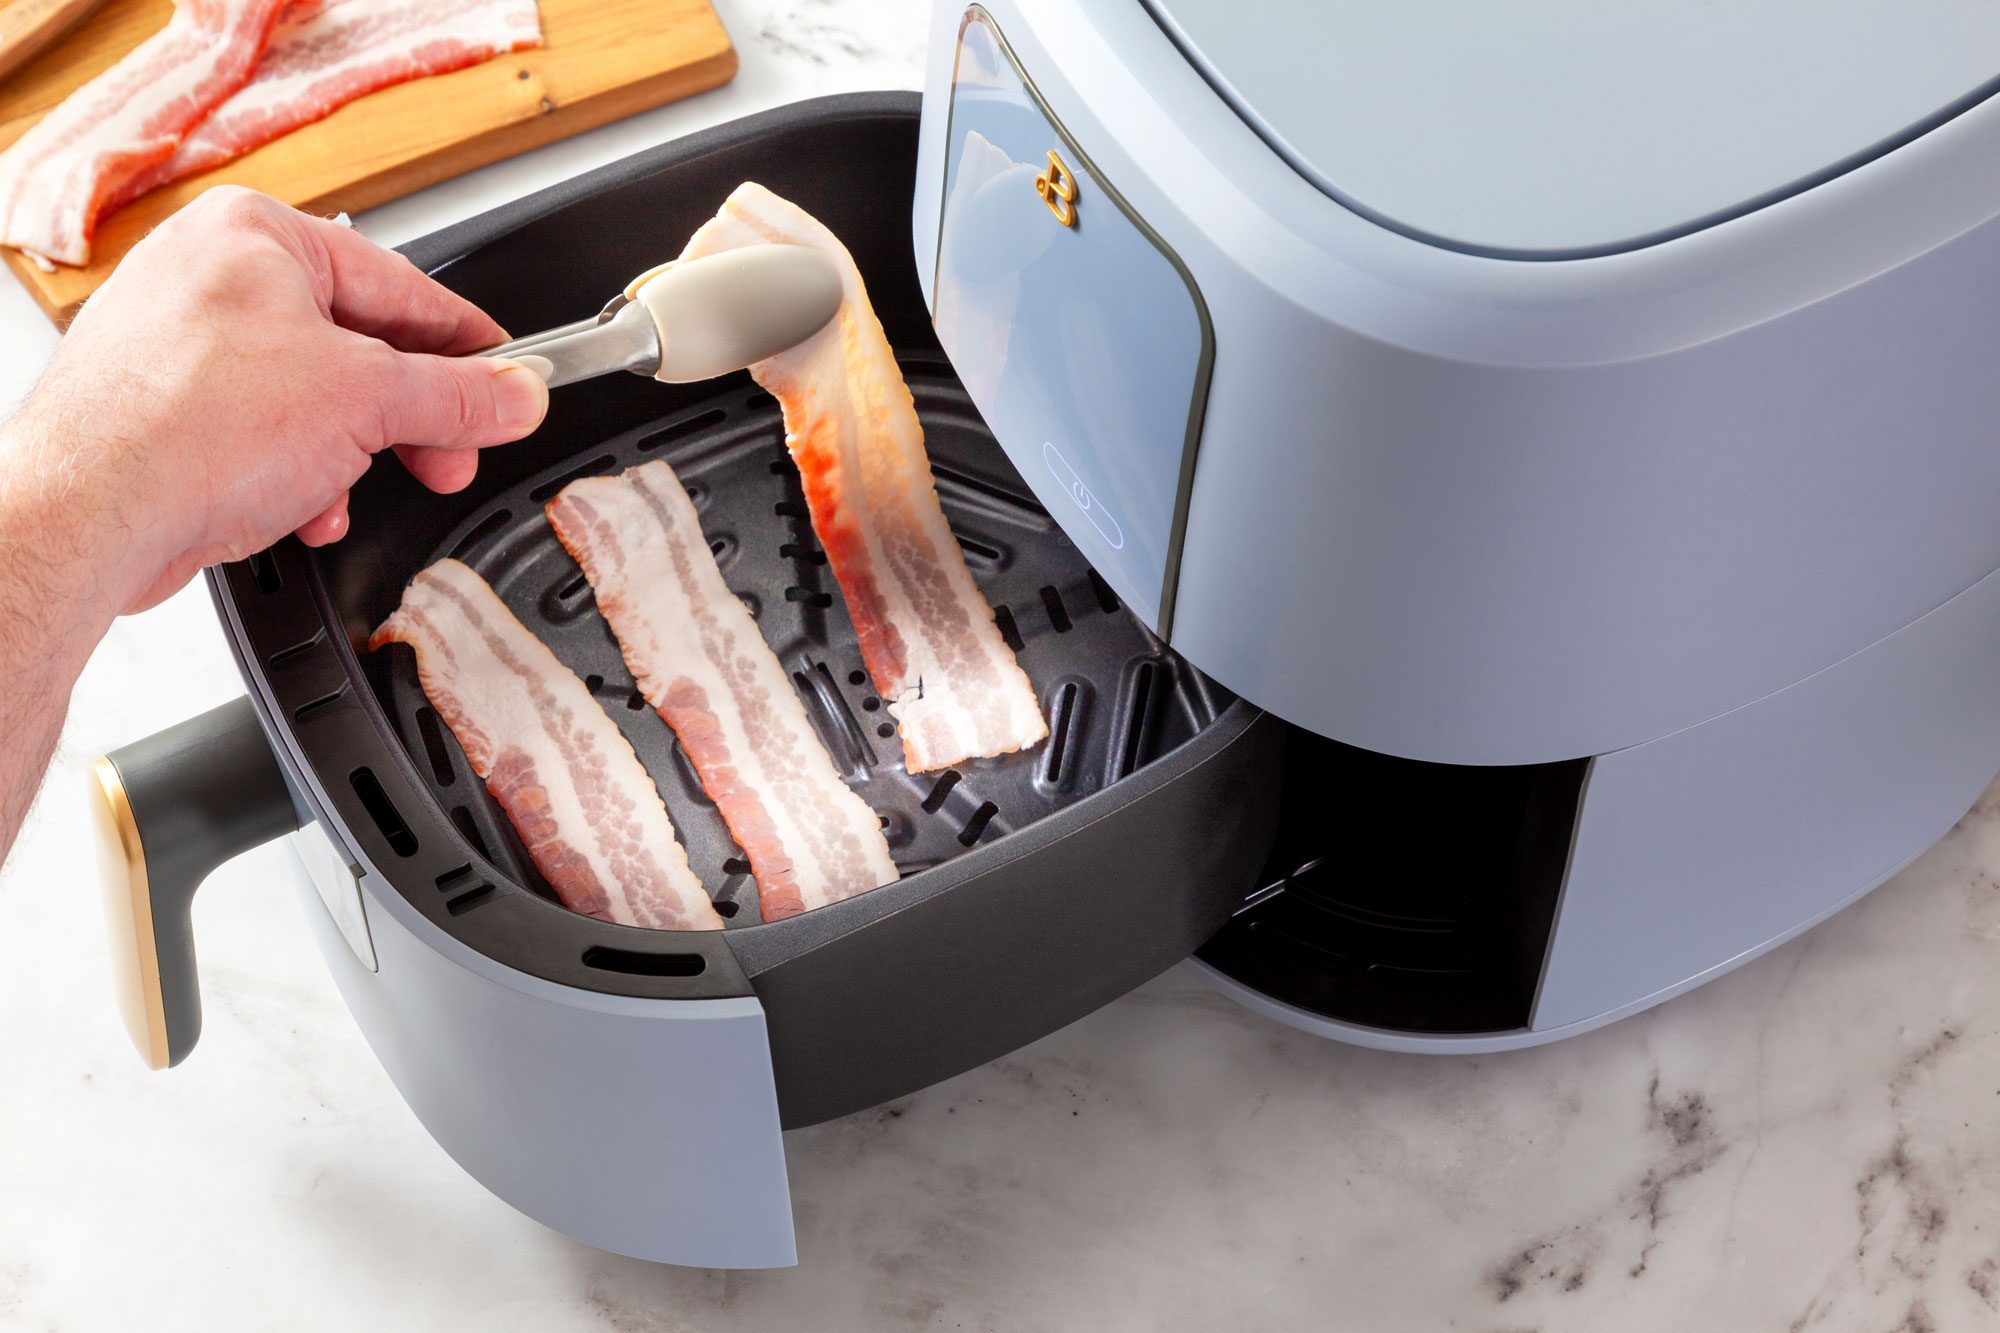 Arrange the bacon in a single layer in the air fryer basket